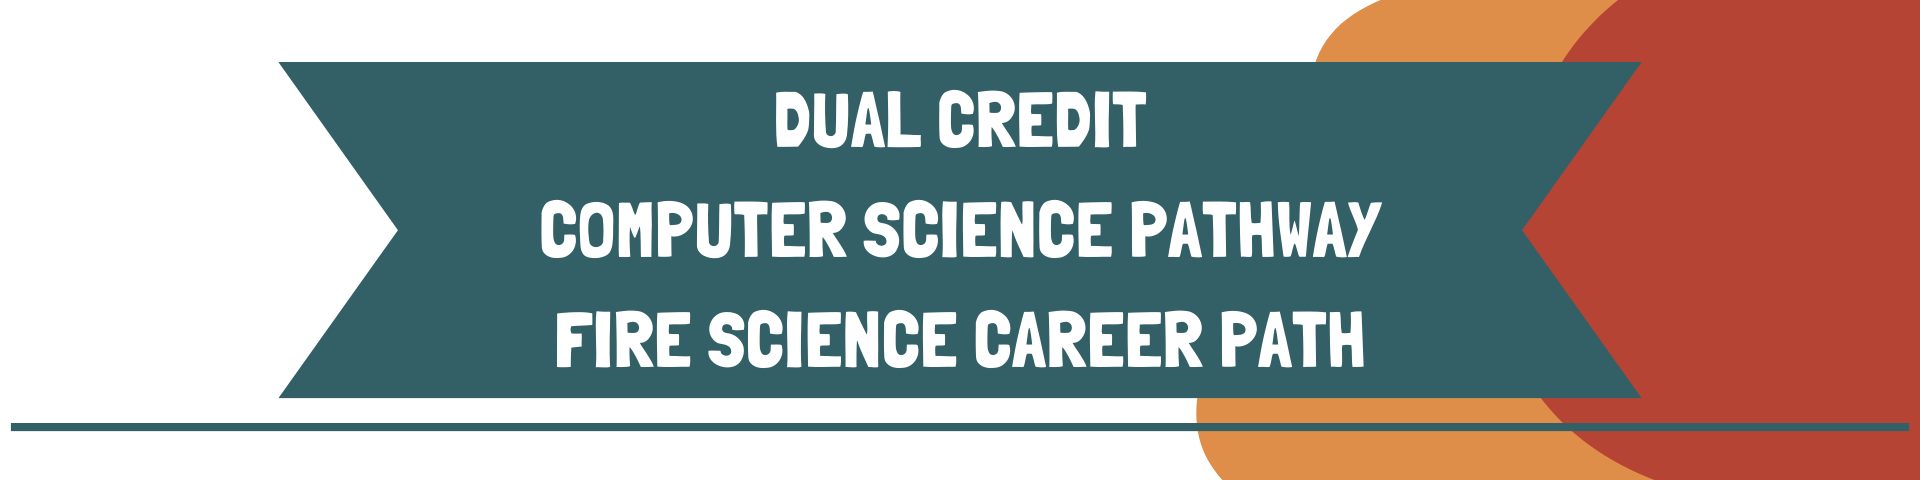 Dual Credit computer science pathway fire science career path